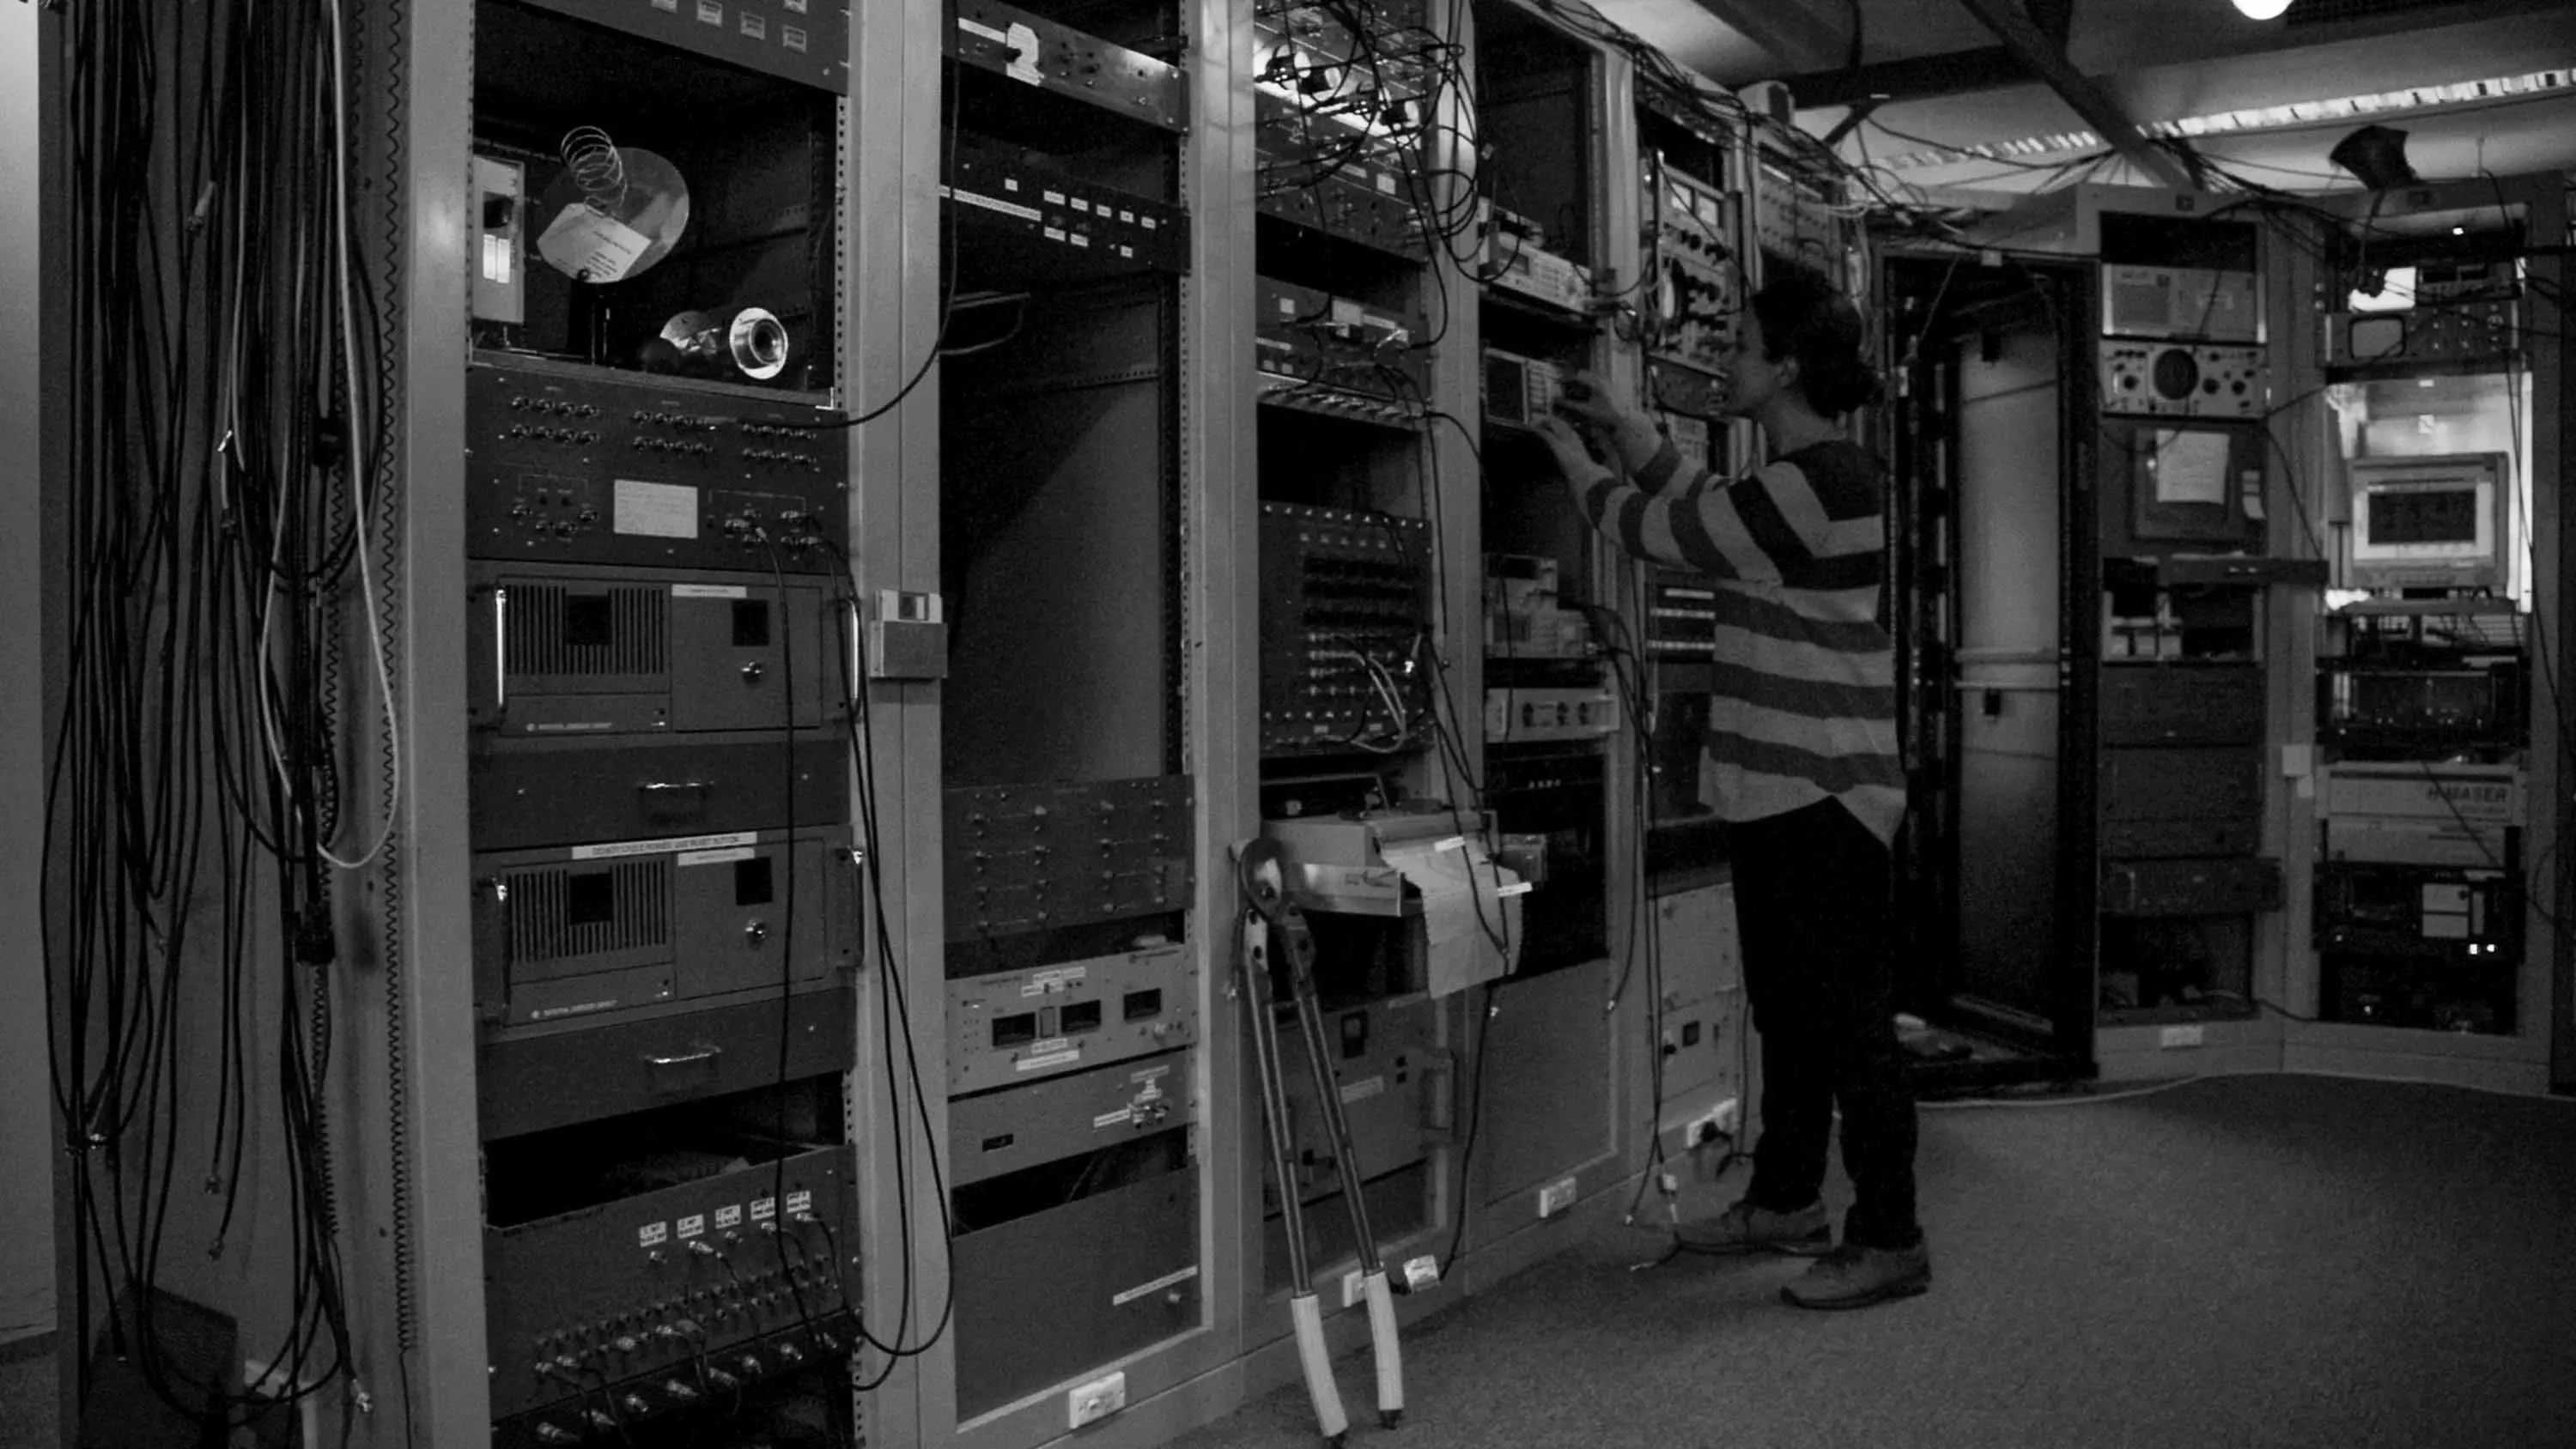 A woman stands next to racks of electronic measuring devices in a computer laboratory.